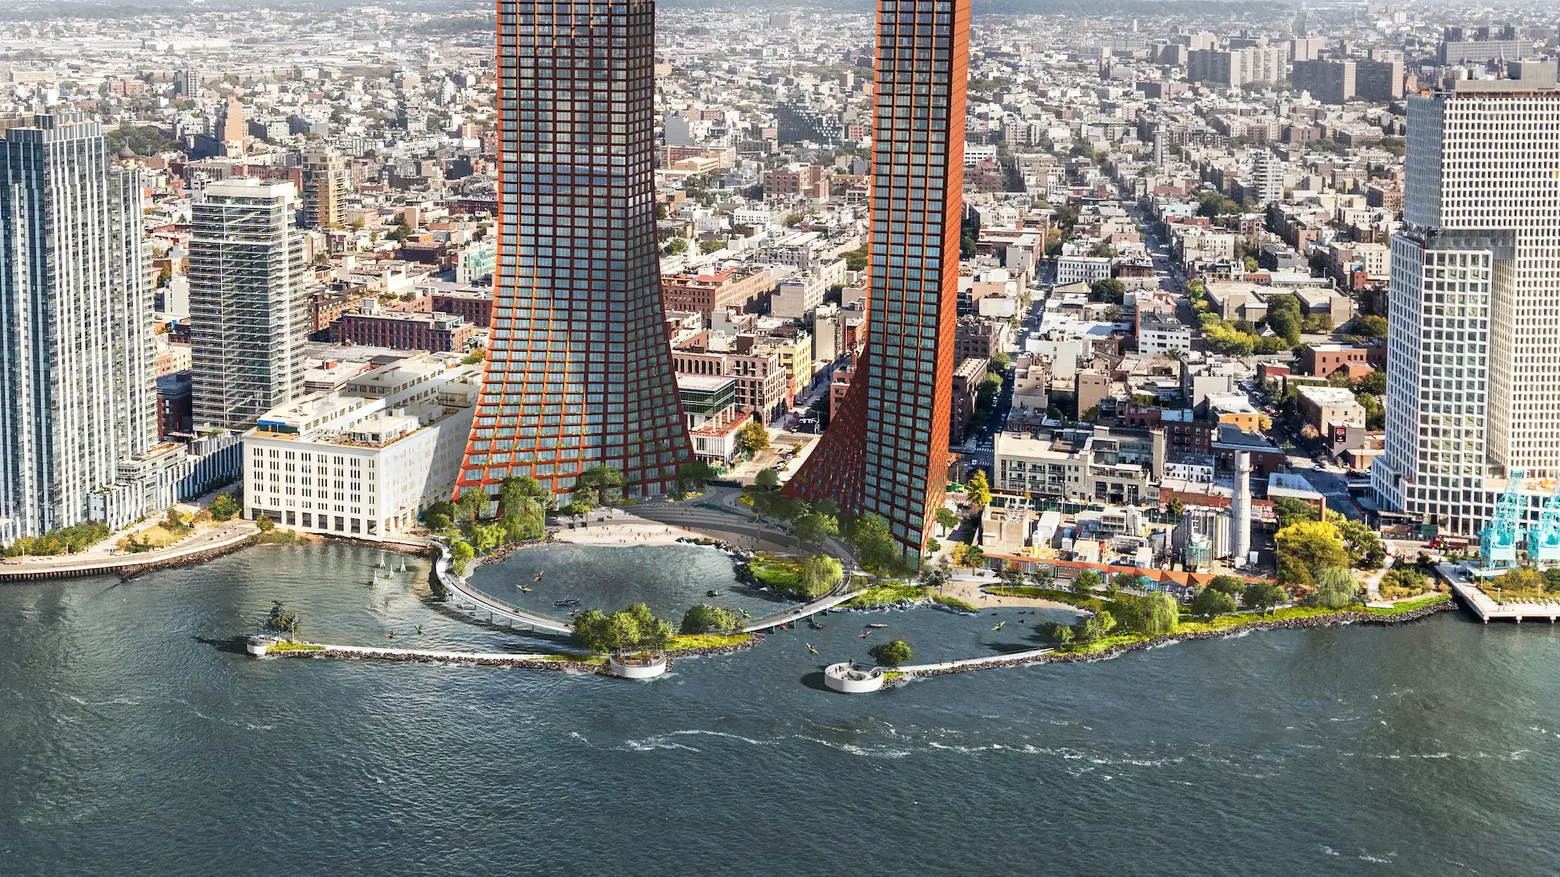 Massive Bjarke Ingels-designed apartment towers and public beach planned for Williamsburg